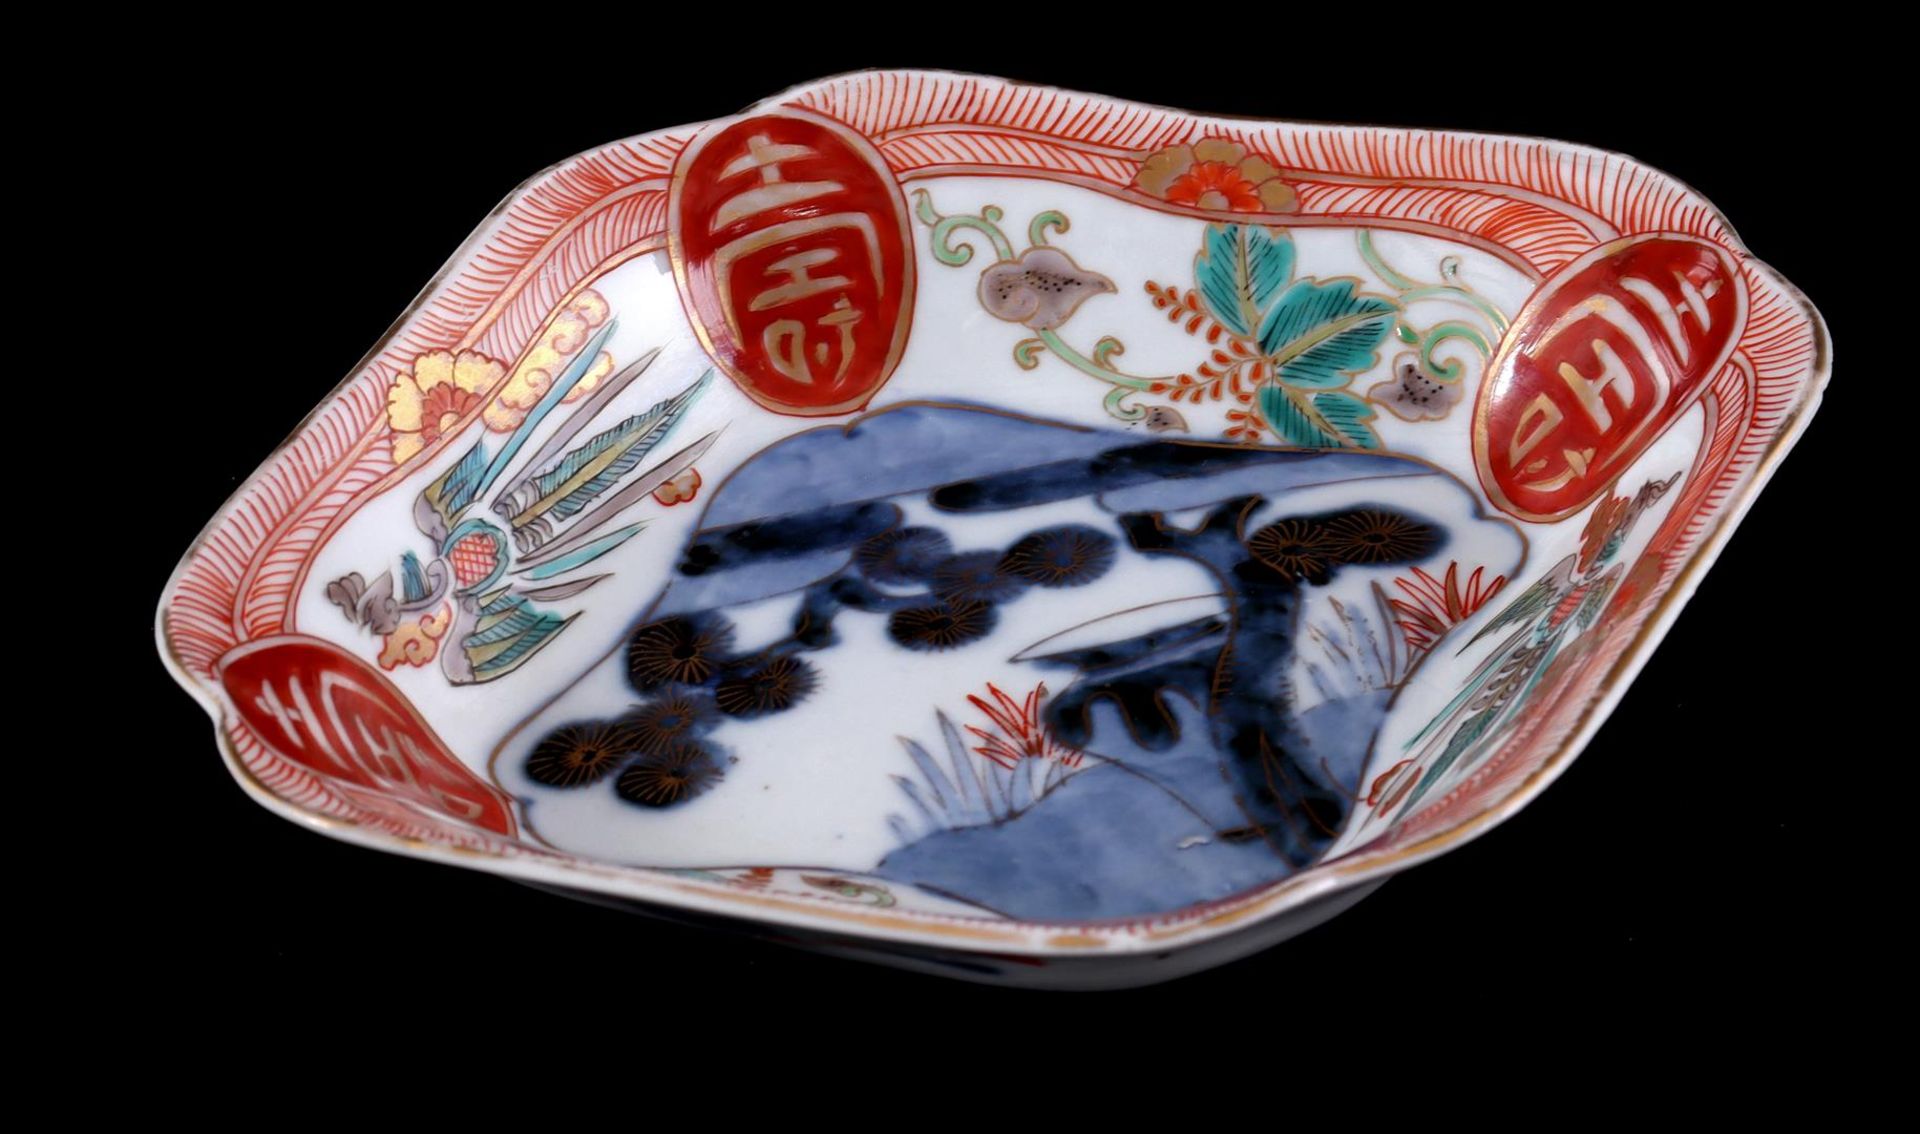 Porcelain pattipan with polychrome colored decor